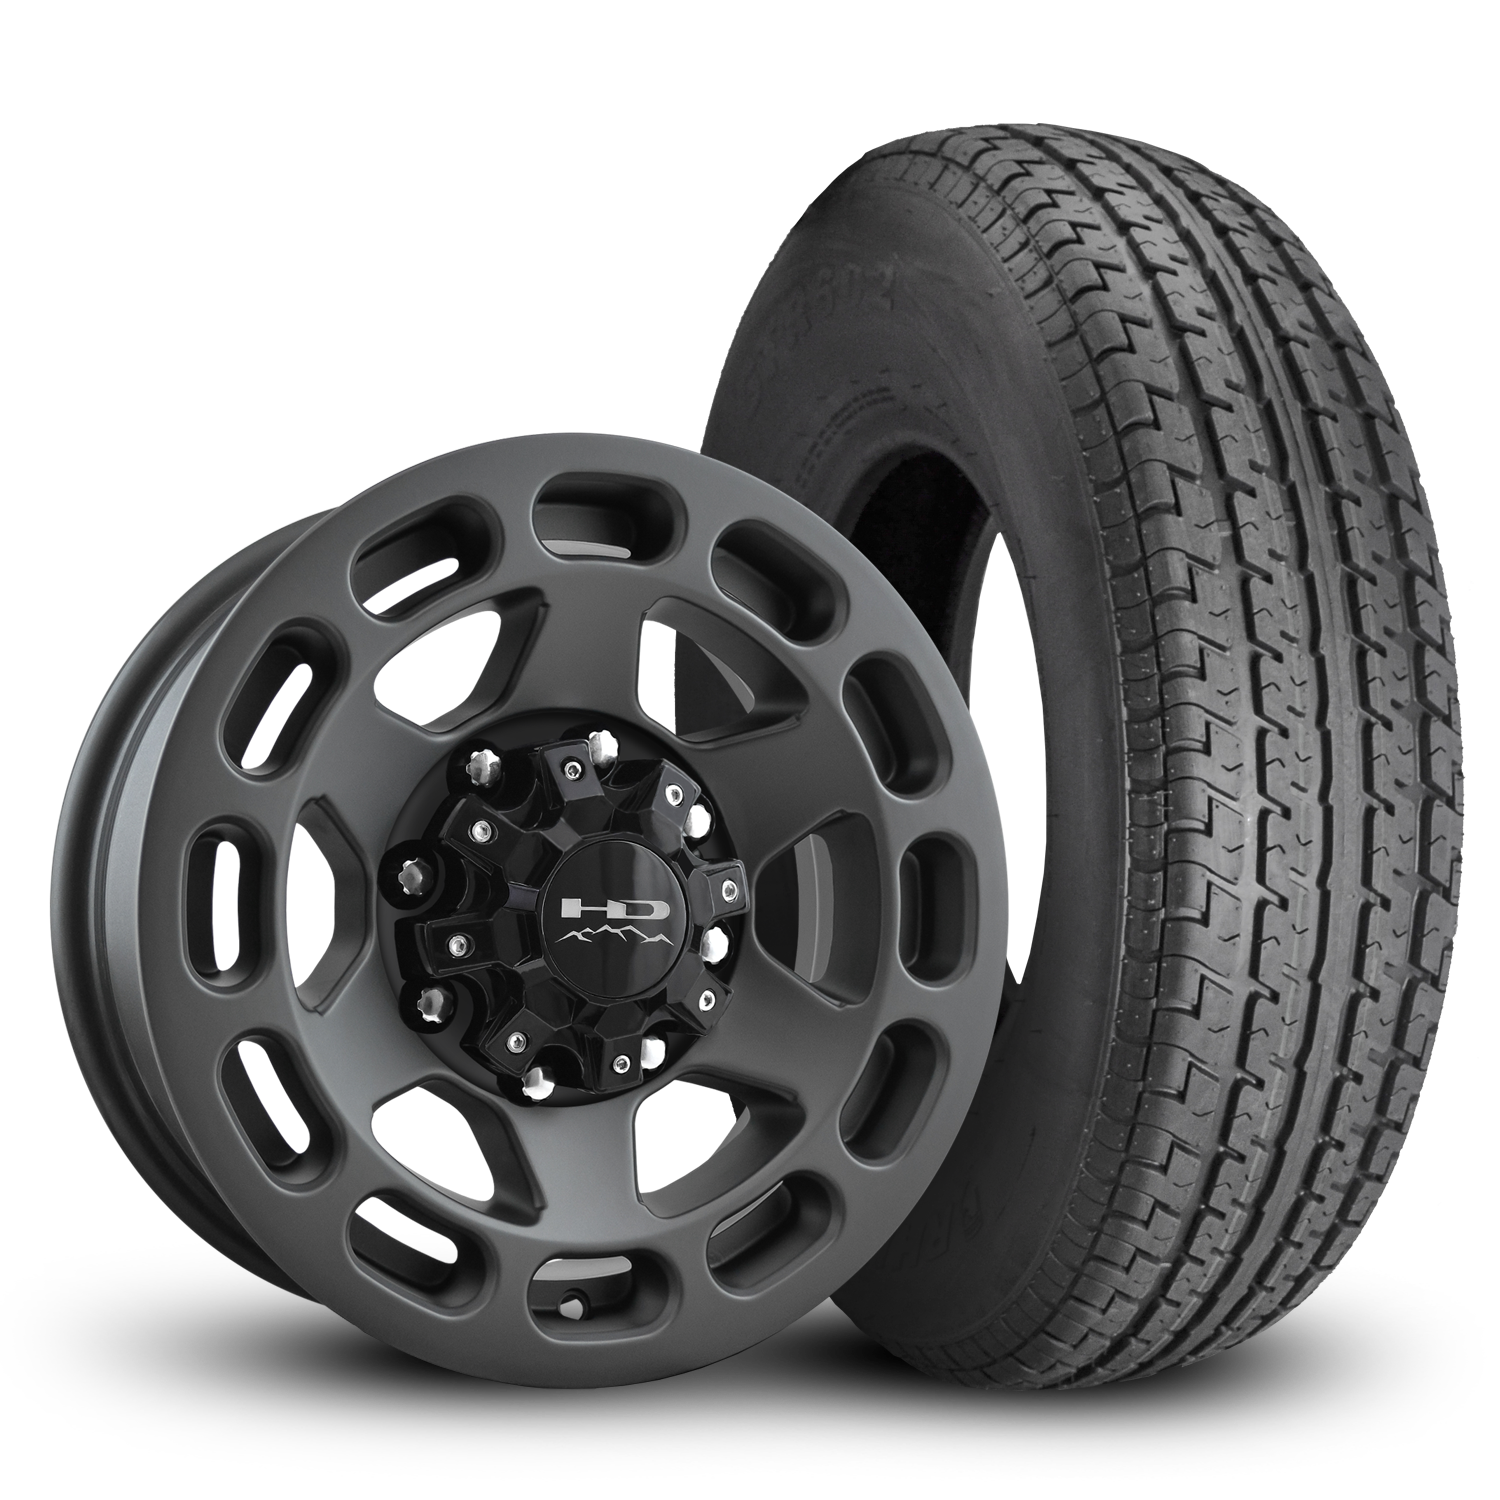 HD Off-Road Patriot Custom Trailer Wheel & Tire packages in 16x6.0 in 8 lug All Satin Grey for Unility, Boat, Car, Construction, Horse, & RV